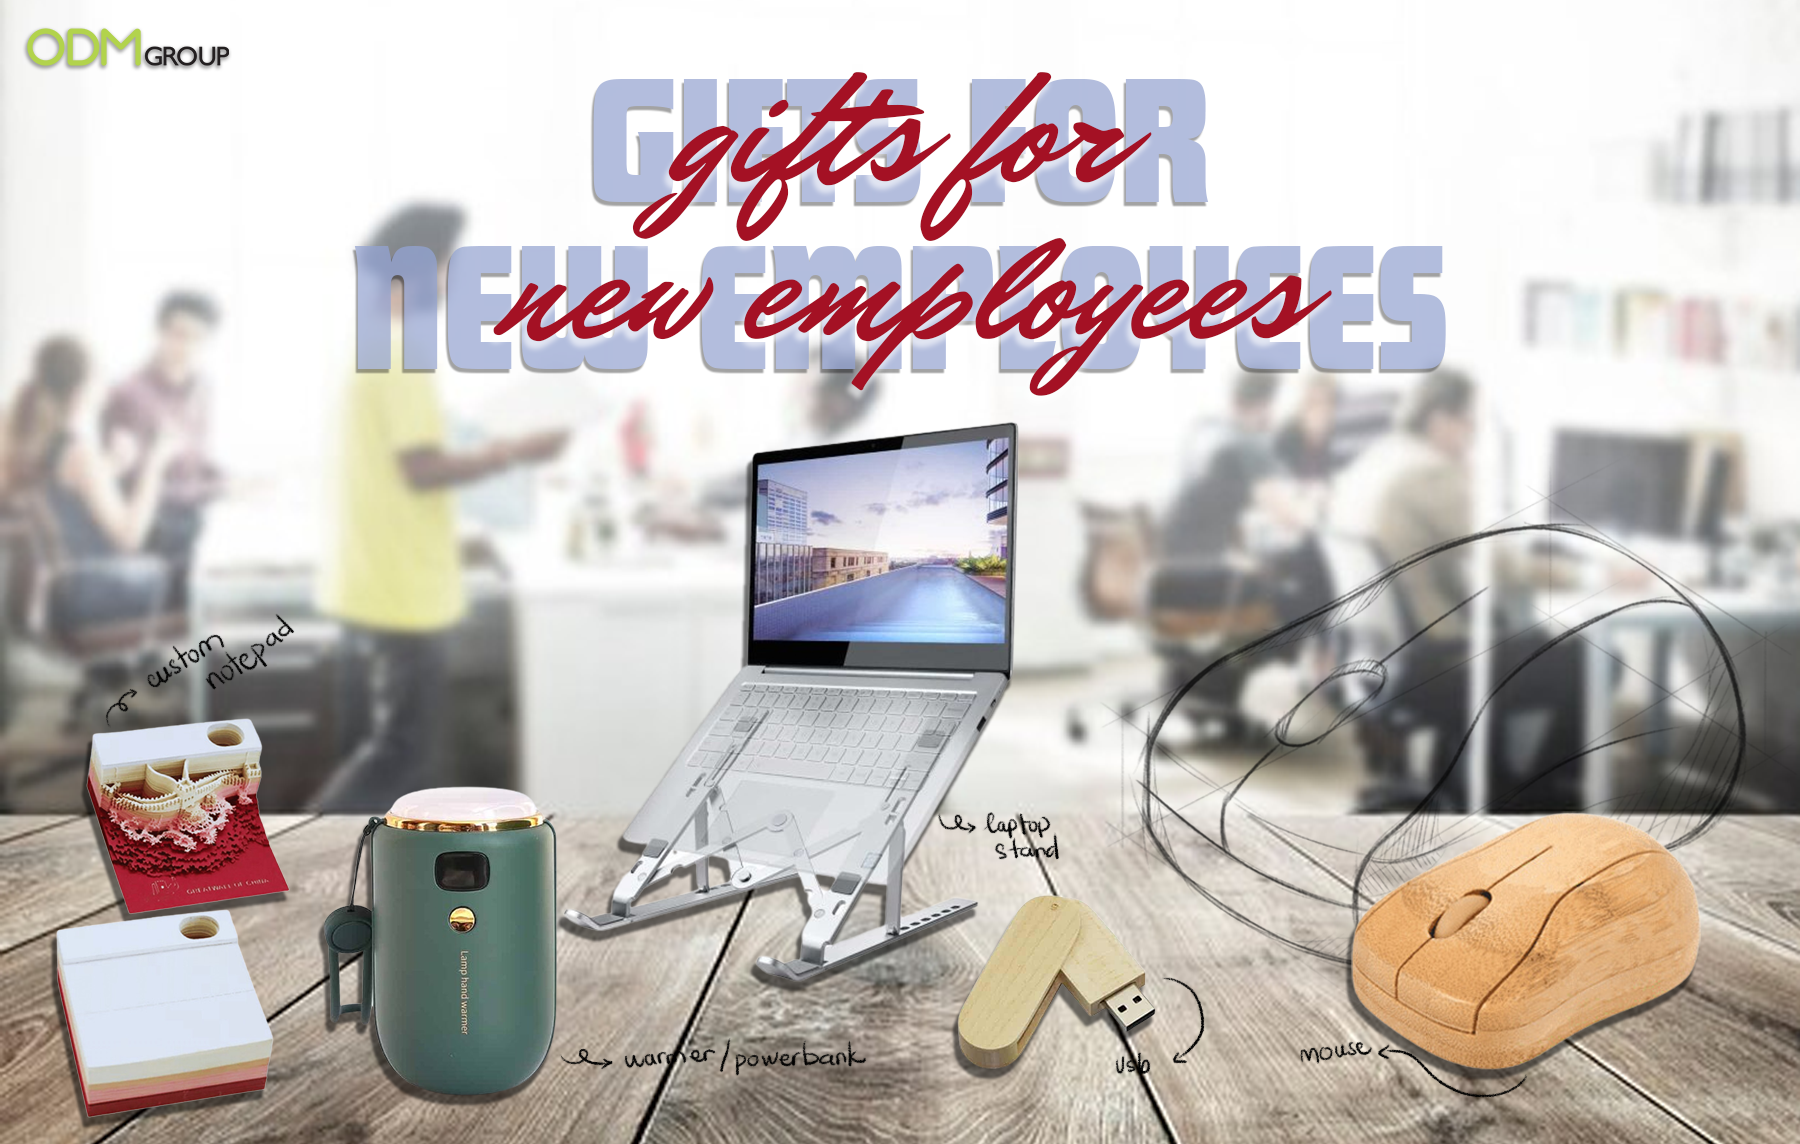 Corporate Gift Ideas - Gifts for New Employees